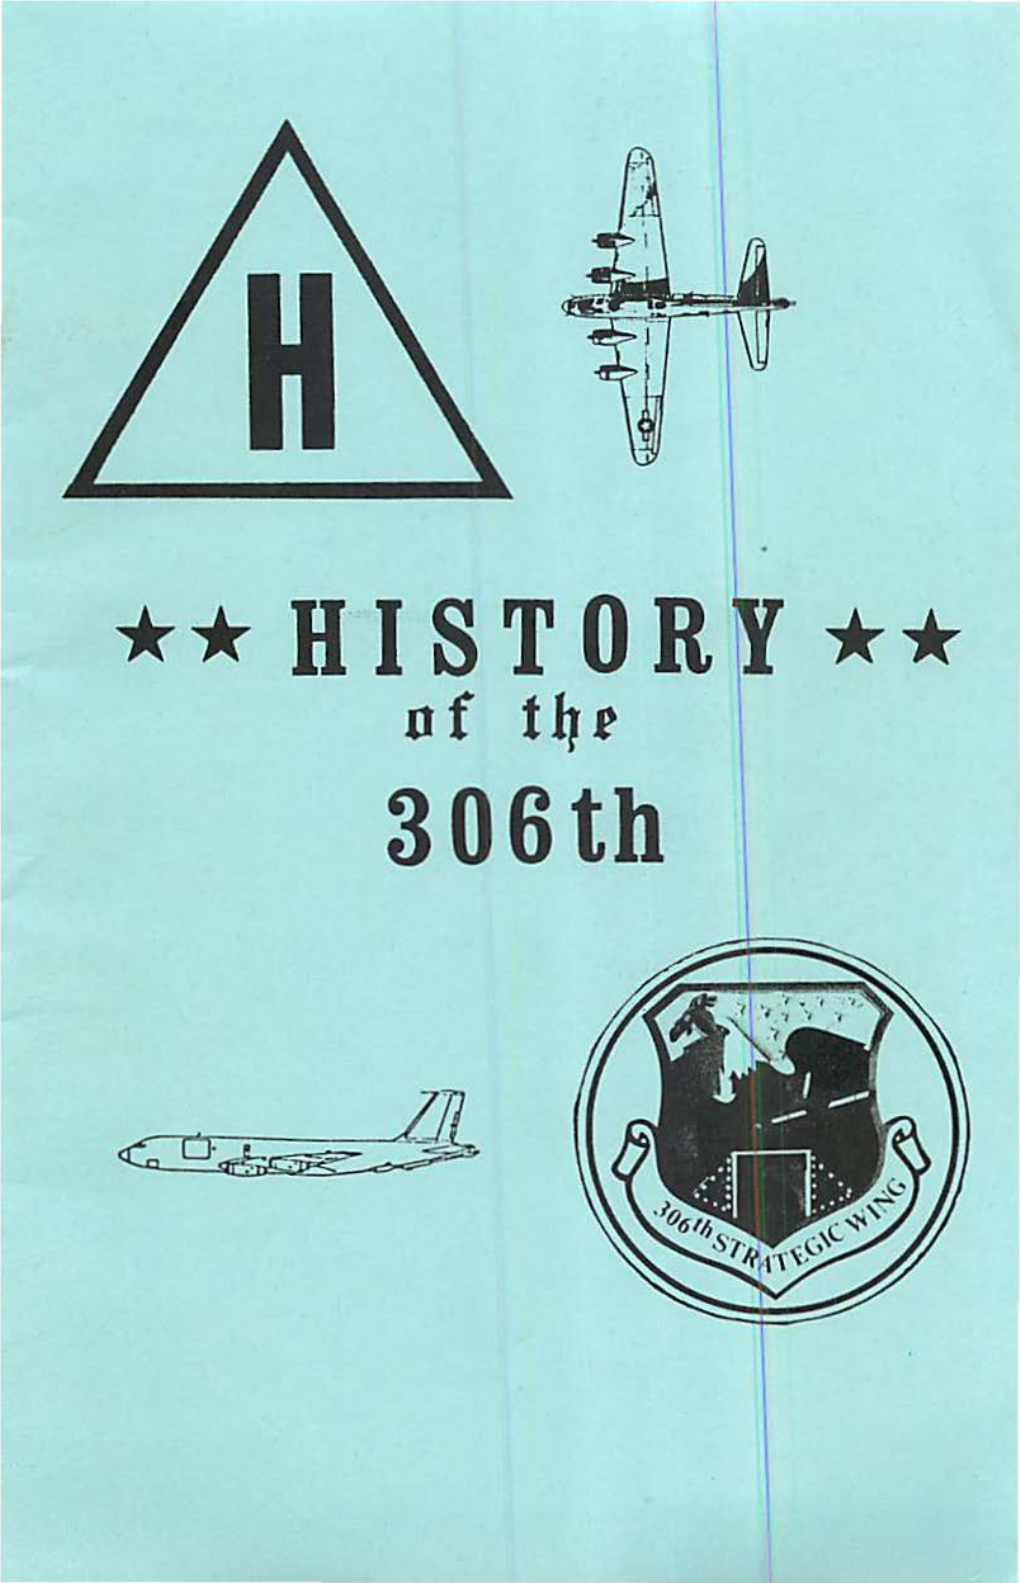 HISTORY** Nf T4t 306Th